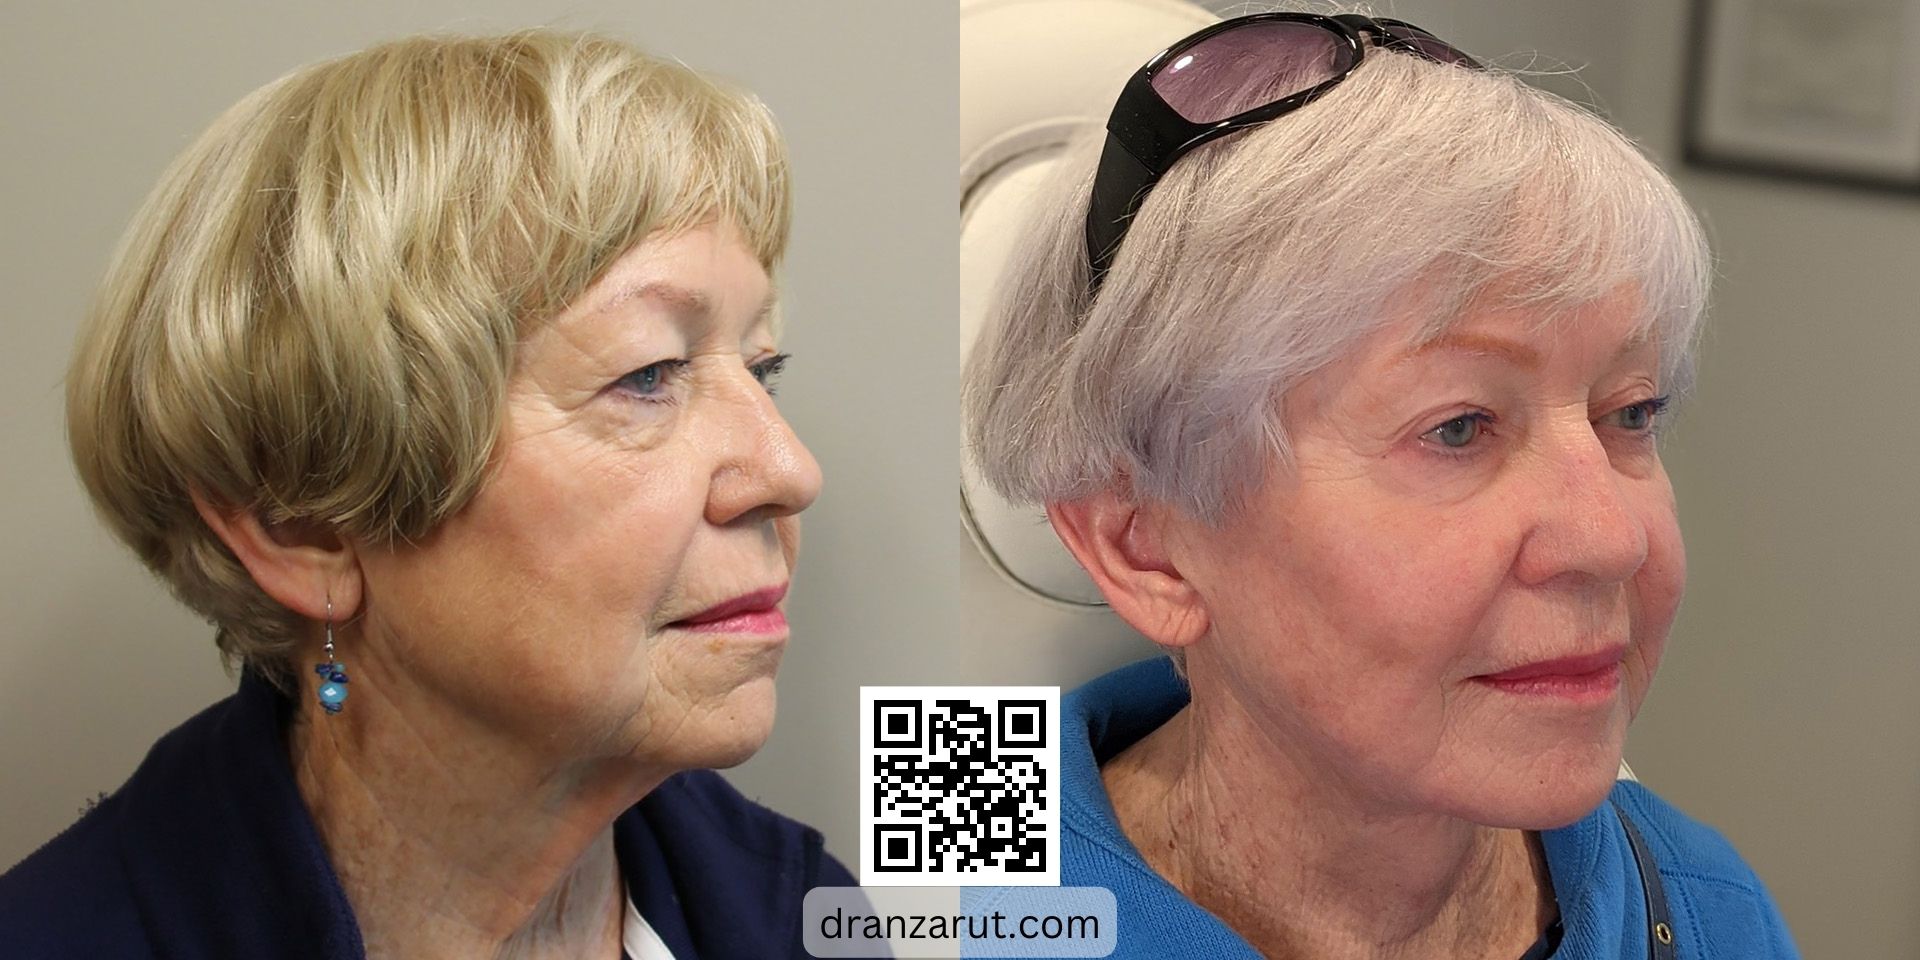 Facelift Before and After Photos - Dr Anzarut Plastic Surgery